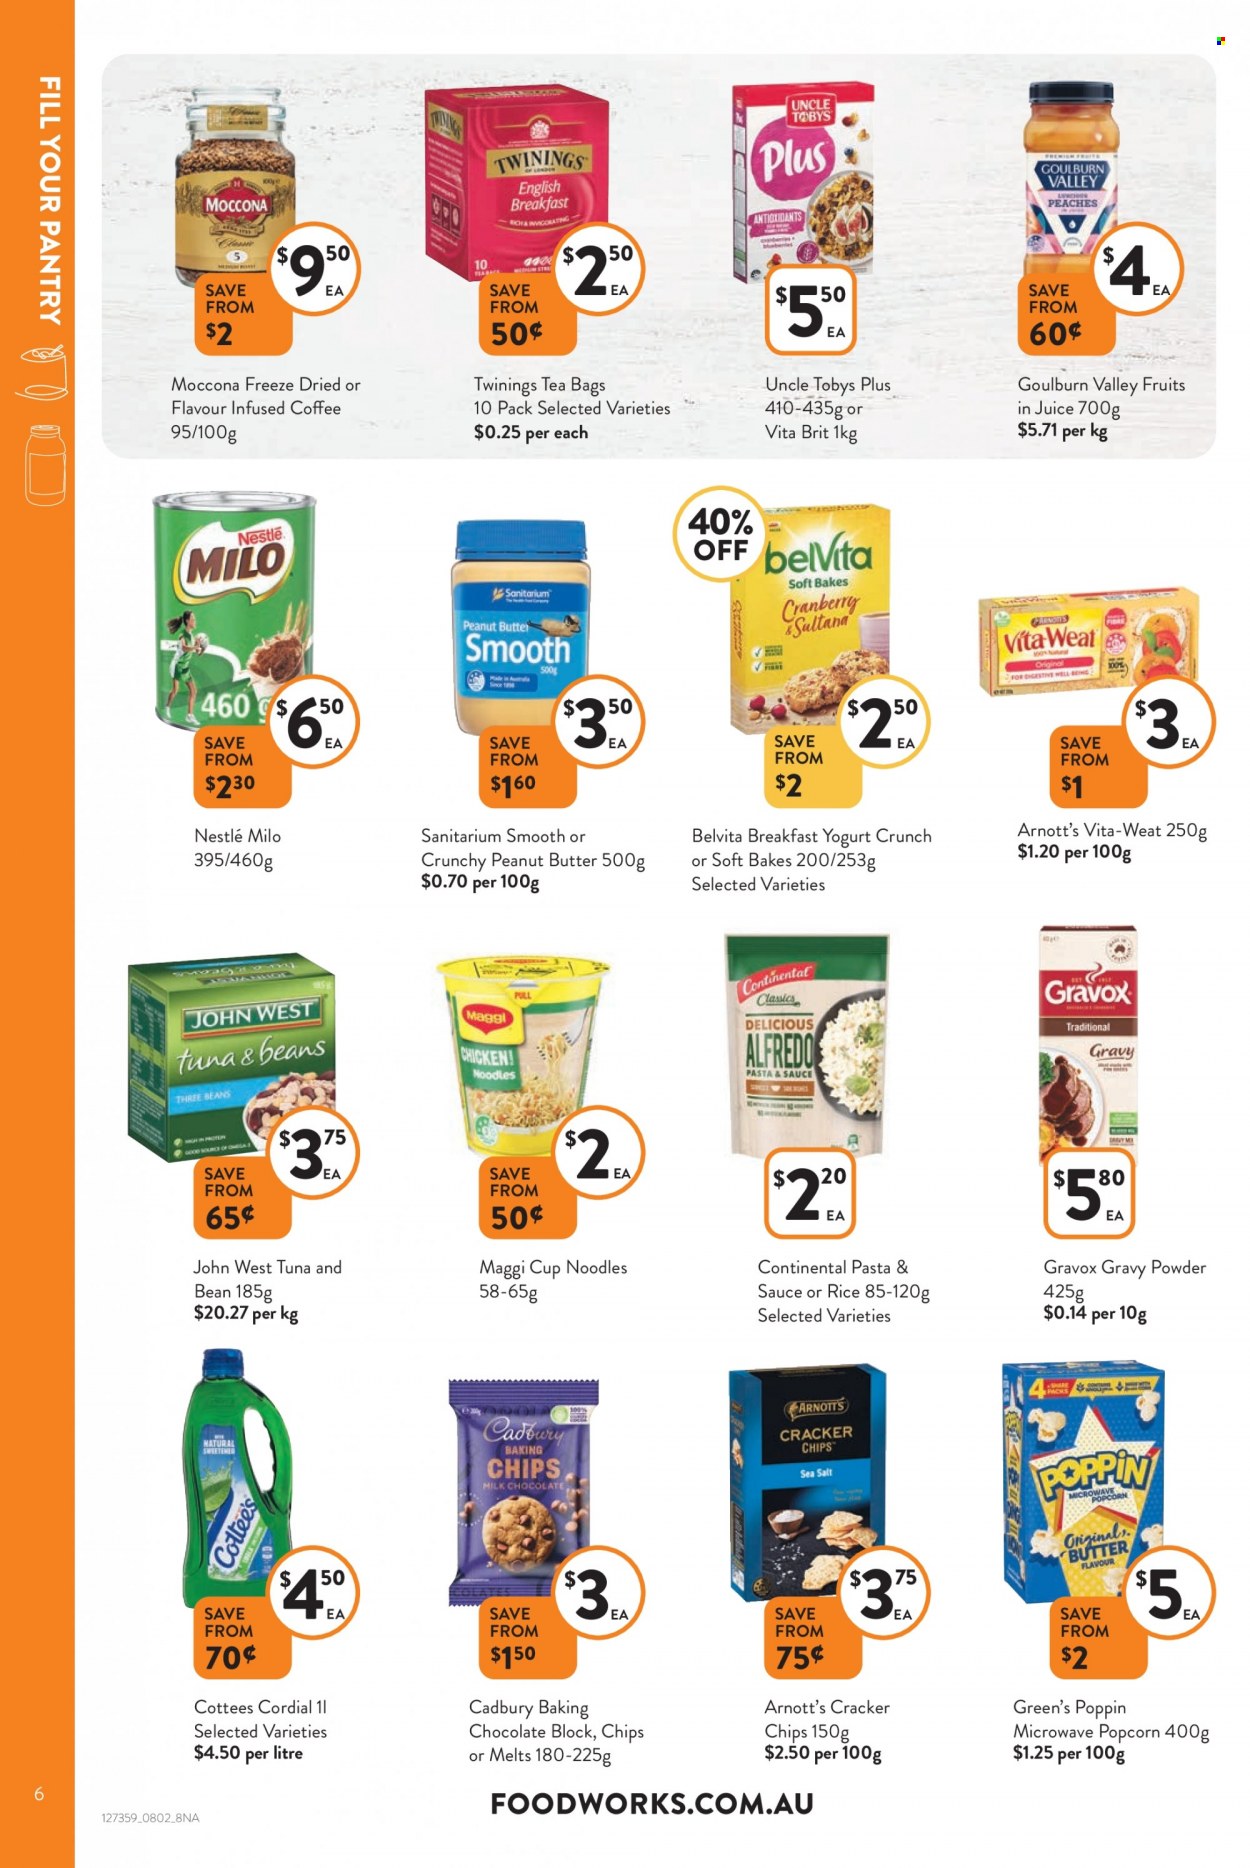 thumbnail - Foodworks Catalogue - 8 Feb 2023 - 14 Feb 2023 - Sales products - corn, peaches, tuna, Maggi Cup, noodles cup, noodles, Continental, yoghurt, Milo, milk chocolate, Nestlé, chocolate, crackers, Cadbury, popcorn, Maggi, baking chips, belVita, rice, juice, tea bags, Twinings, coffee, Moccona. Page 6.